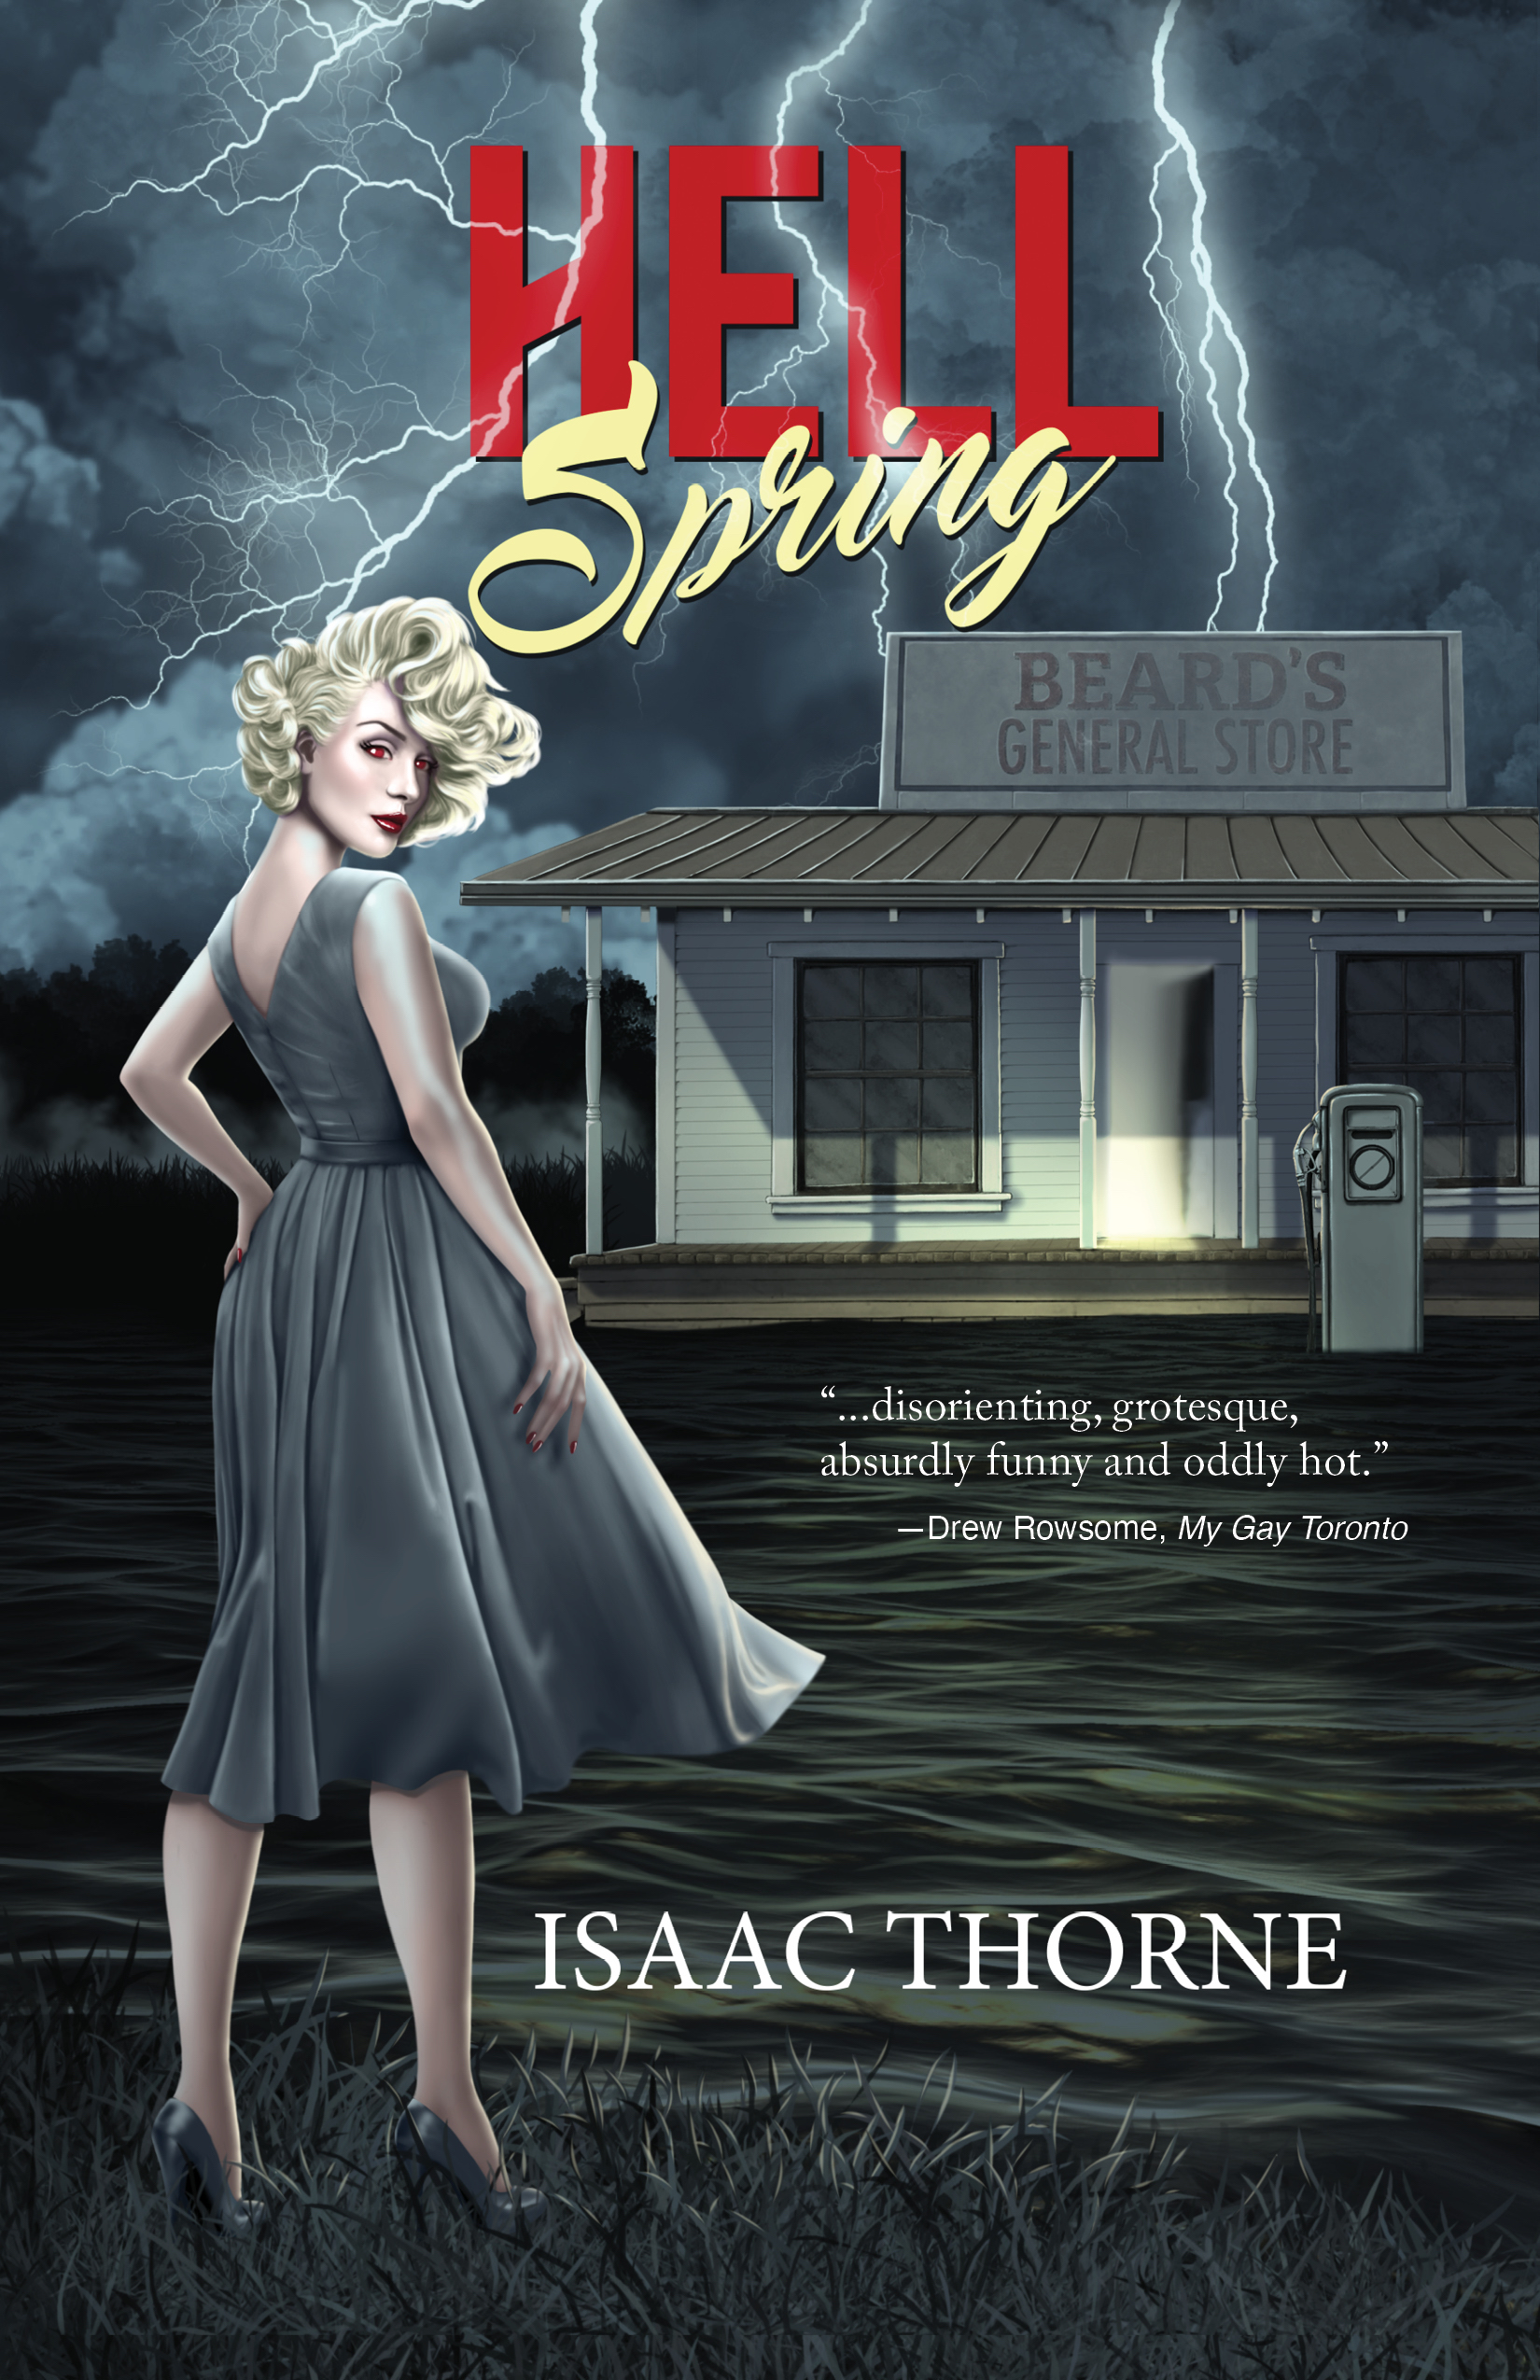 Cover of horror novel 'Hell Spring' by Isaac Thorne